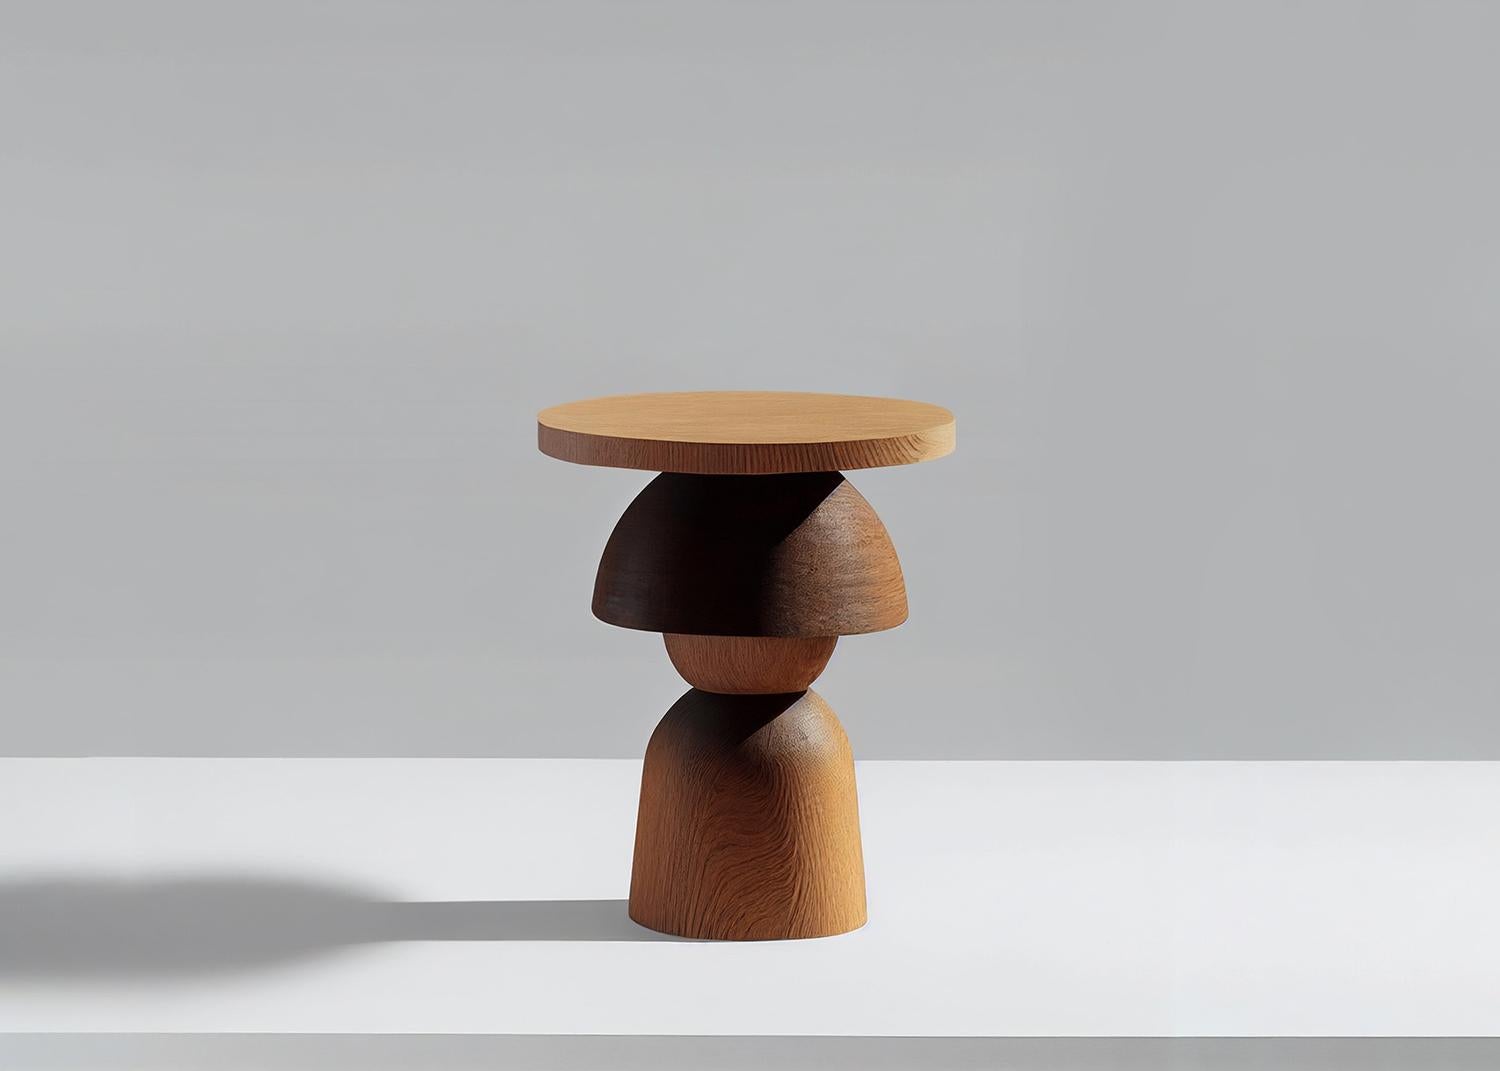 Socle 1 Side Table, Auxiliary Table, Night Stand 

Socle is a small solid wood table designed by the NONO design team. Made of solid wood, its elaborated construction serves as a support, much like a plinth for a statue or sculpture.

In the past,